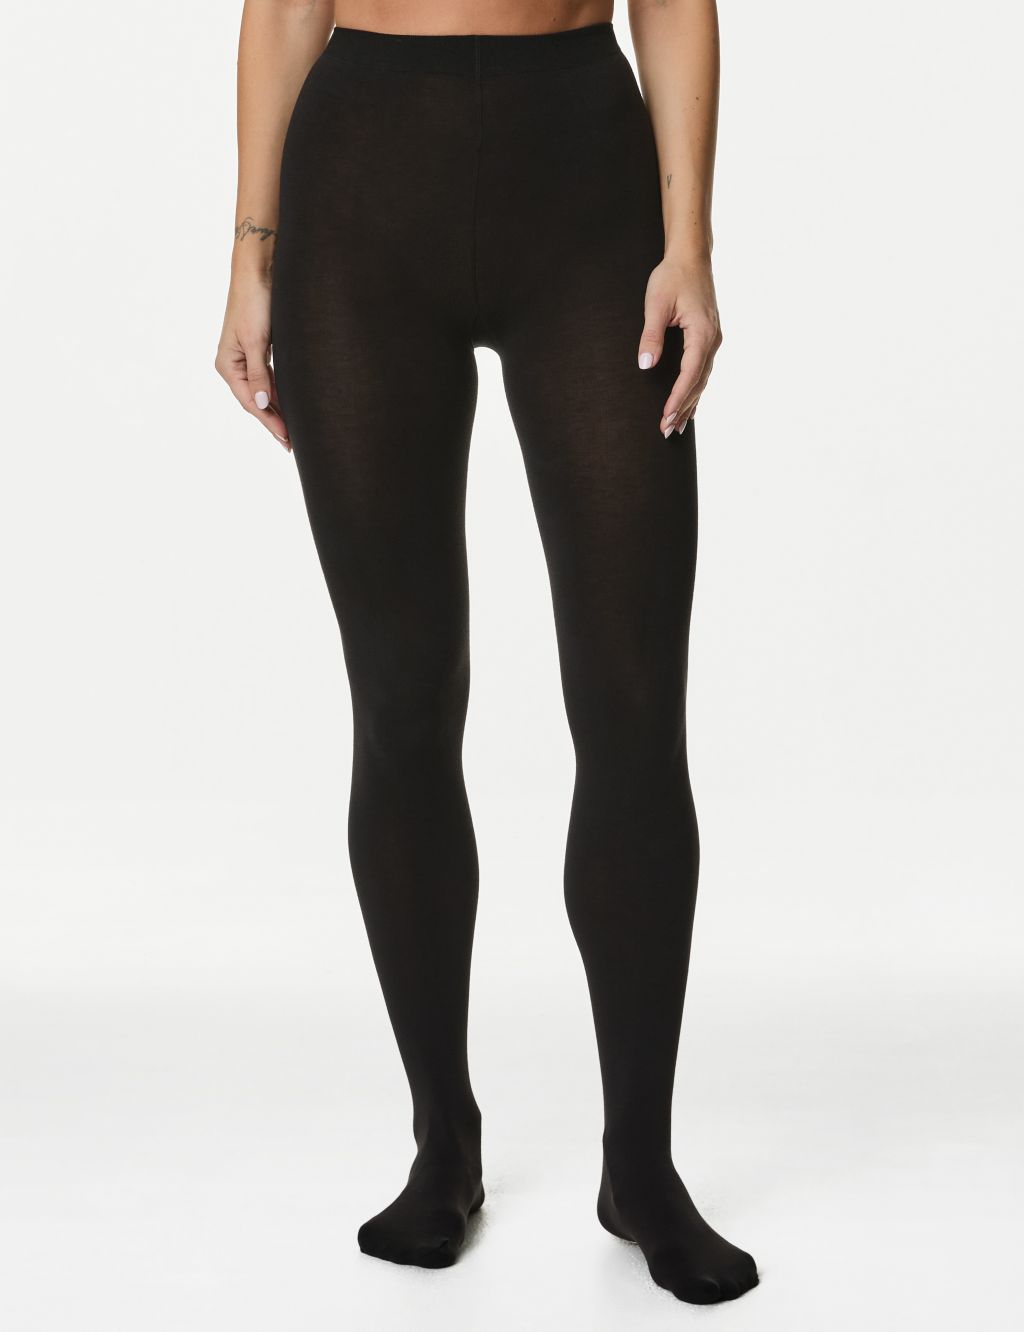 Calzedonia Grey Blend Thermal Super Opaque Tights